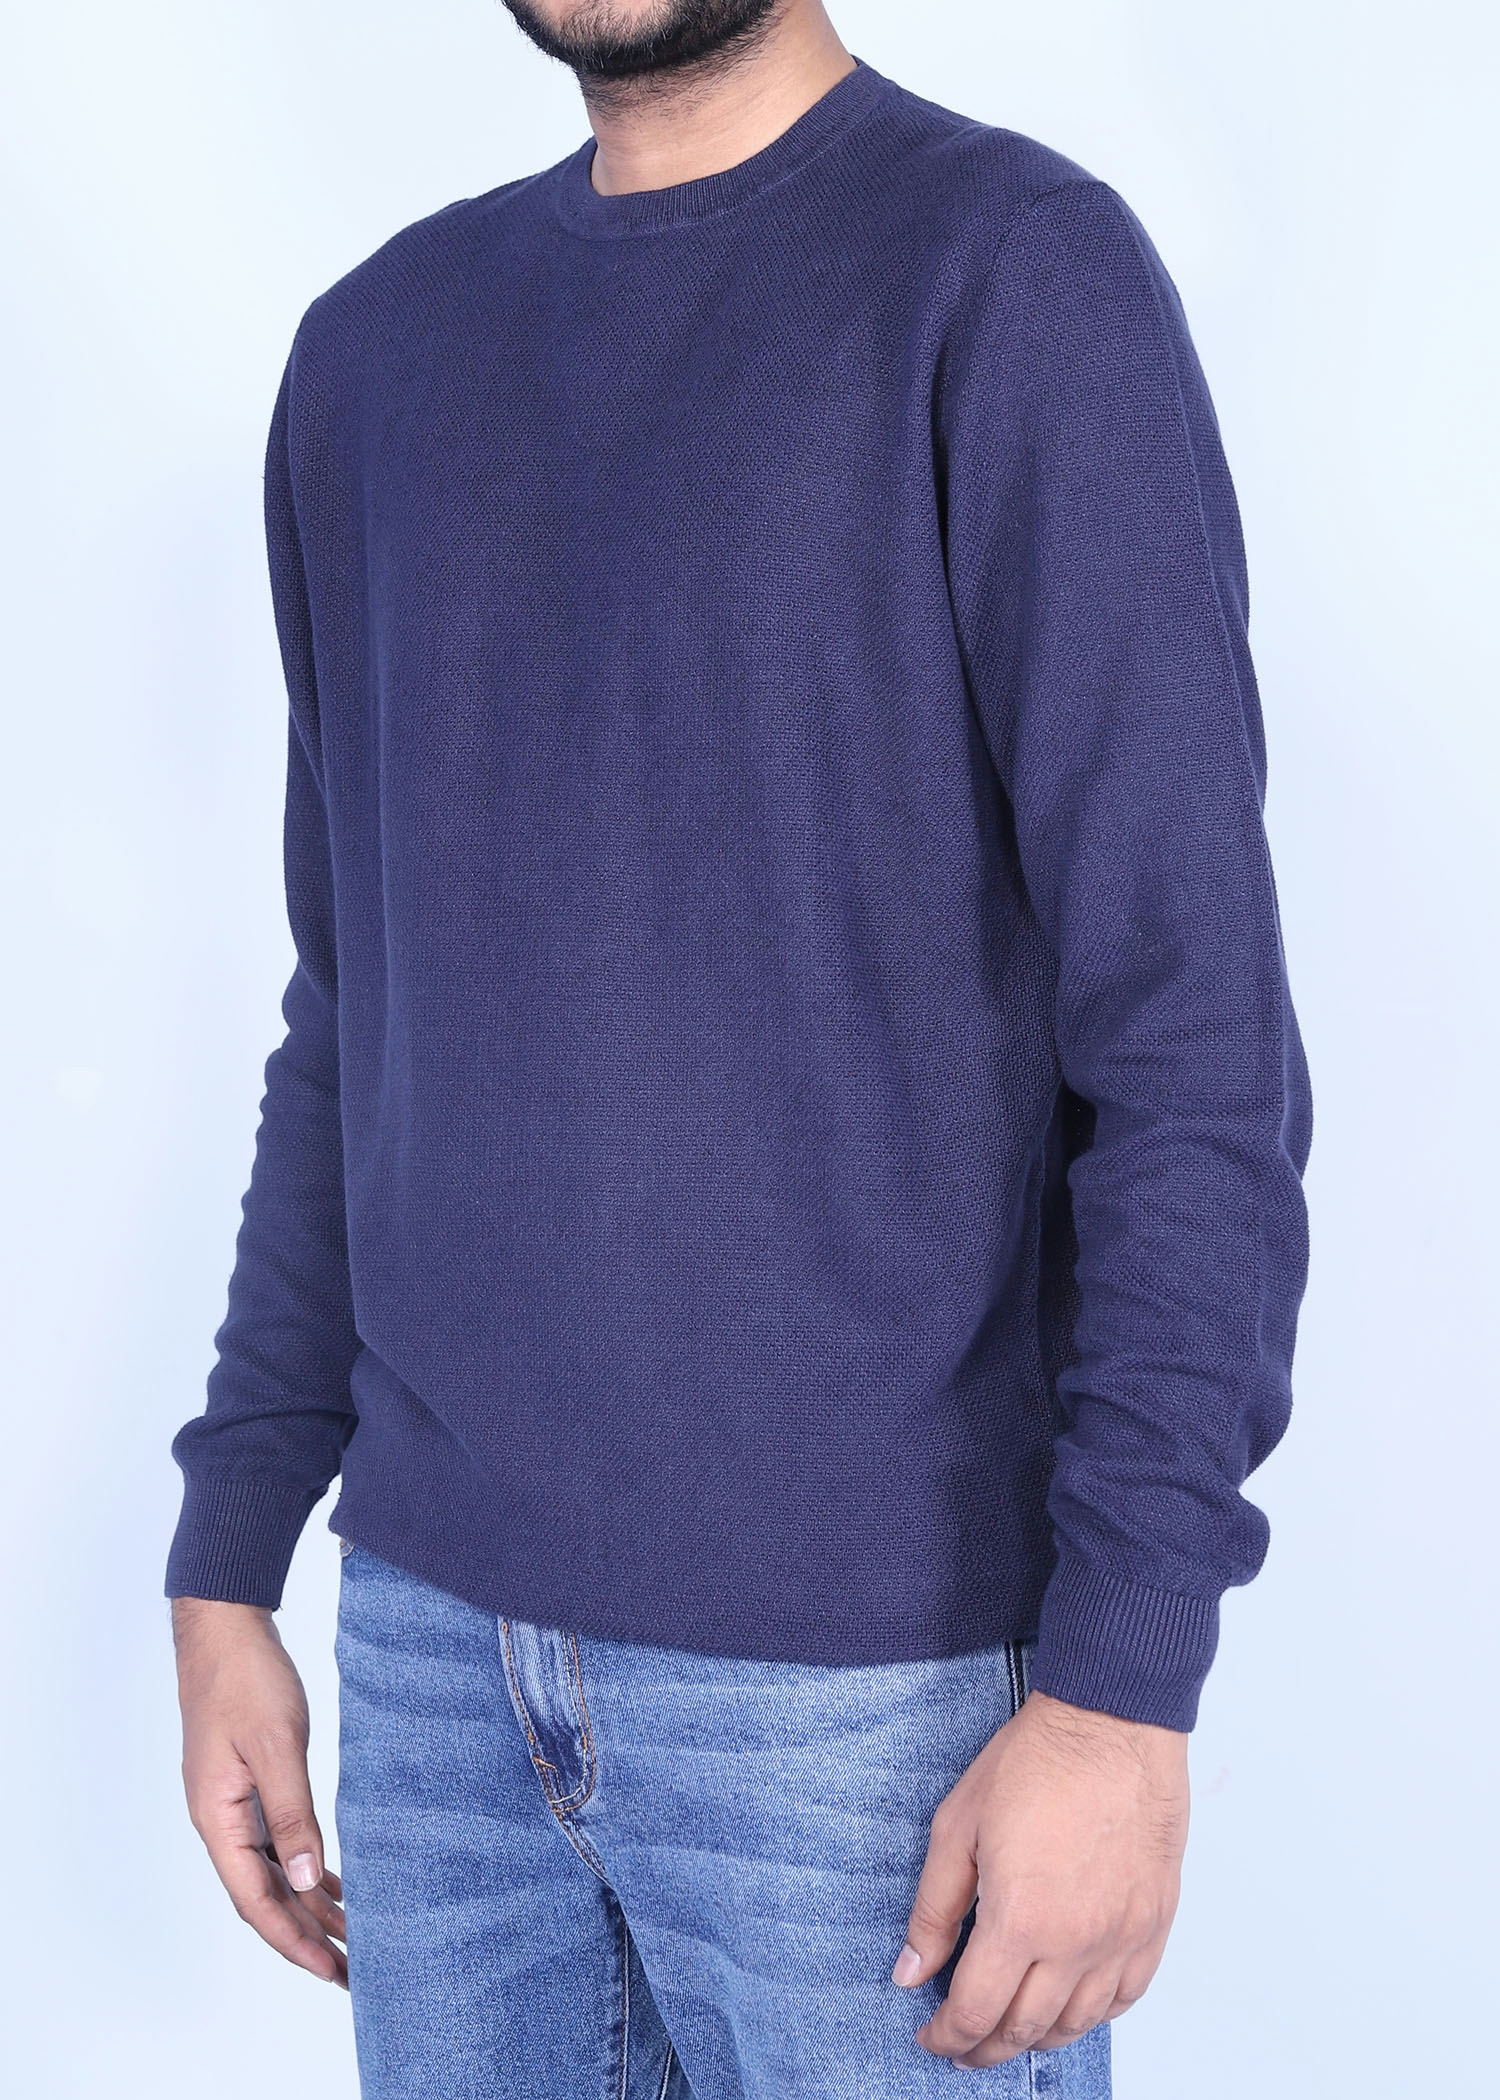 bougie bird sweater navy color half side view